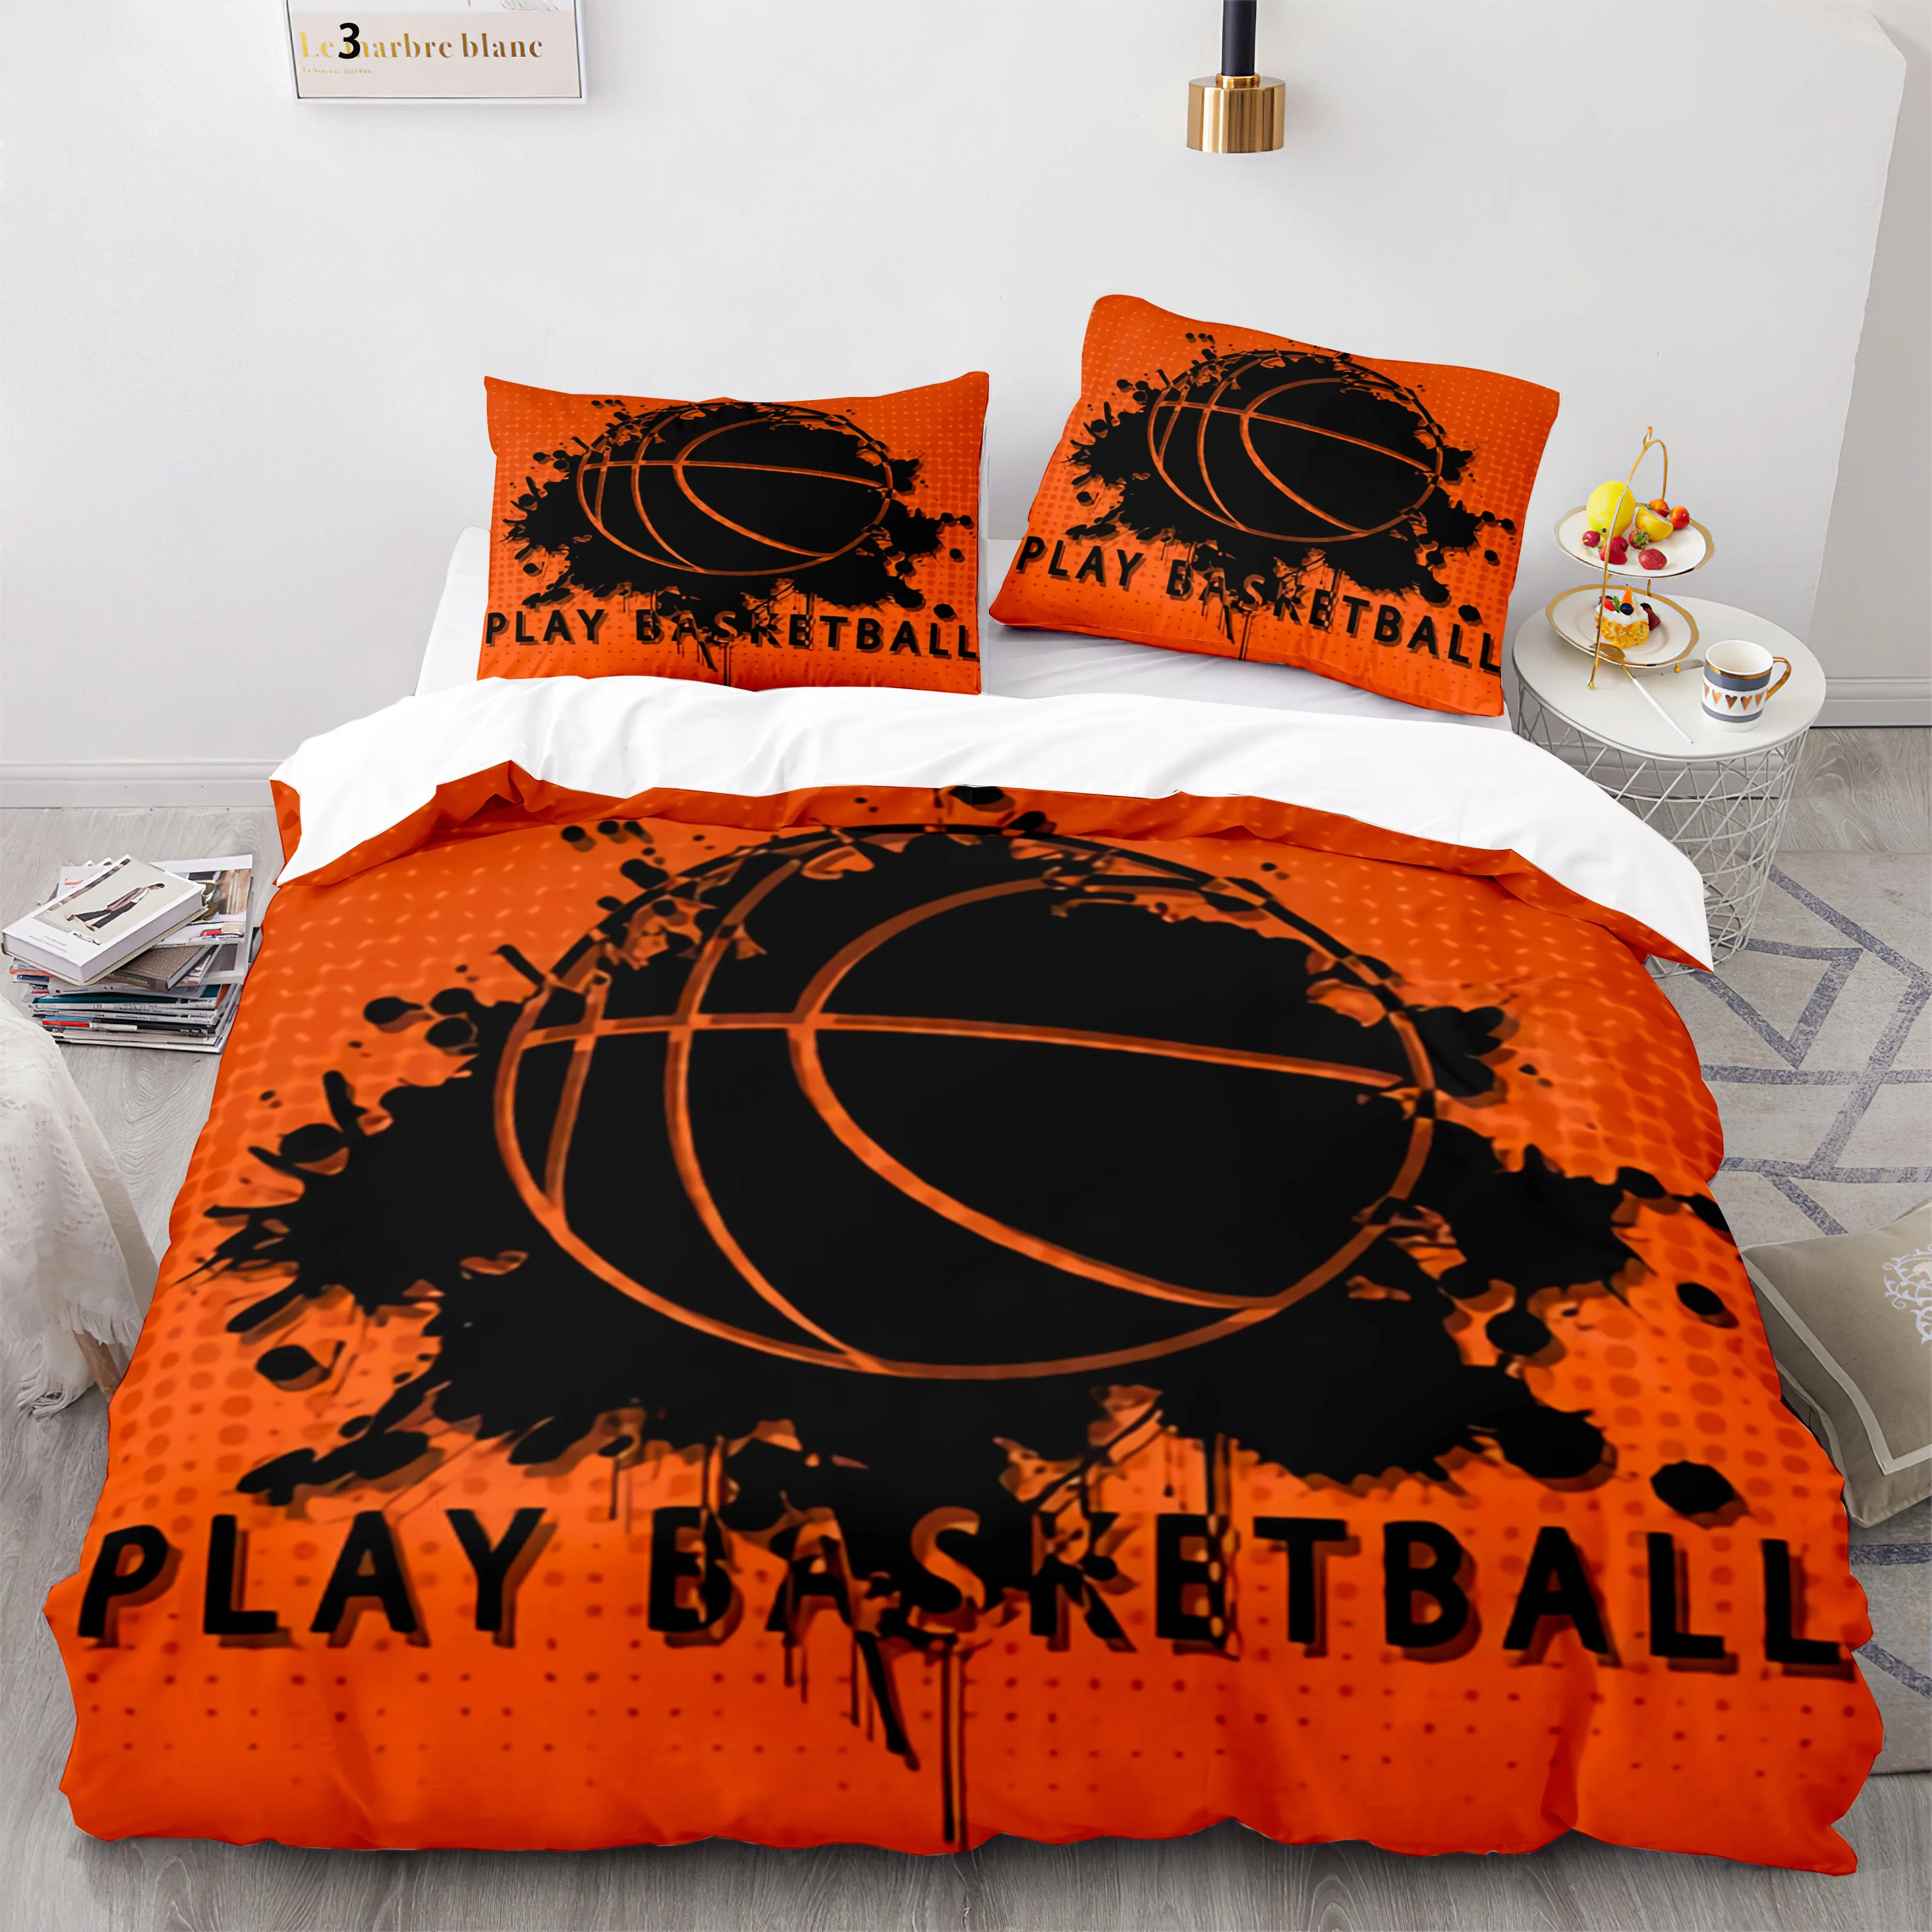 

Cartoon Basketball Pattern Painting Multiple Color Duvet Cover Set Bed Sheet Pillowcases Luxury Queen Comforter Bedding Sets